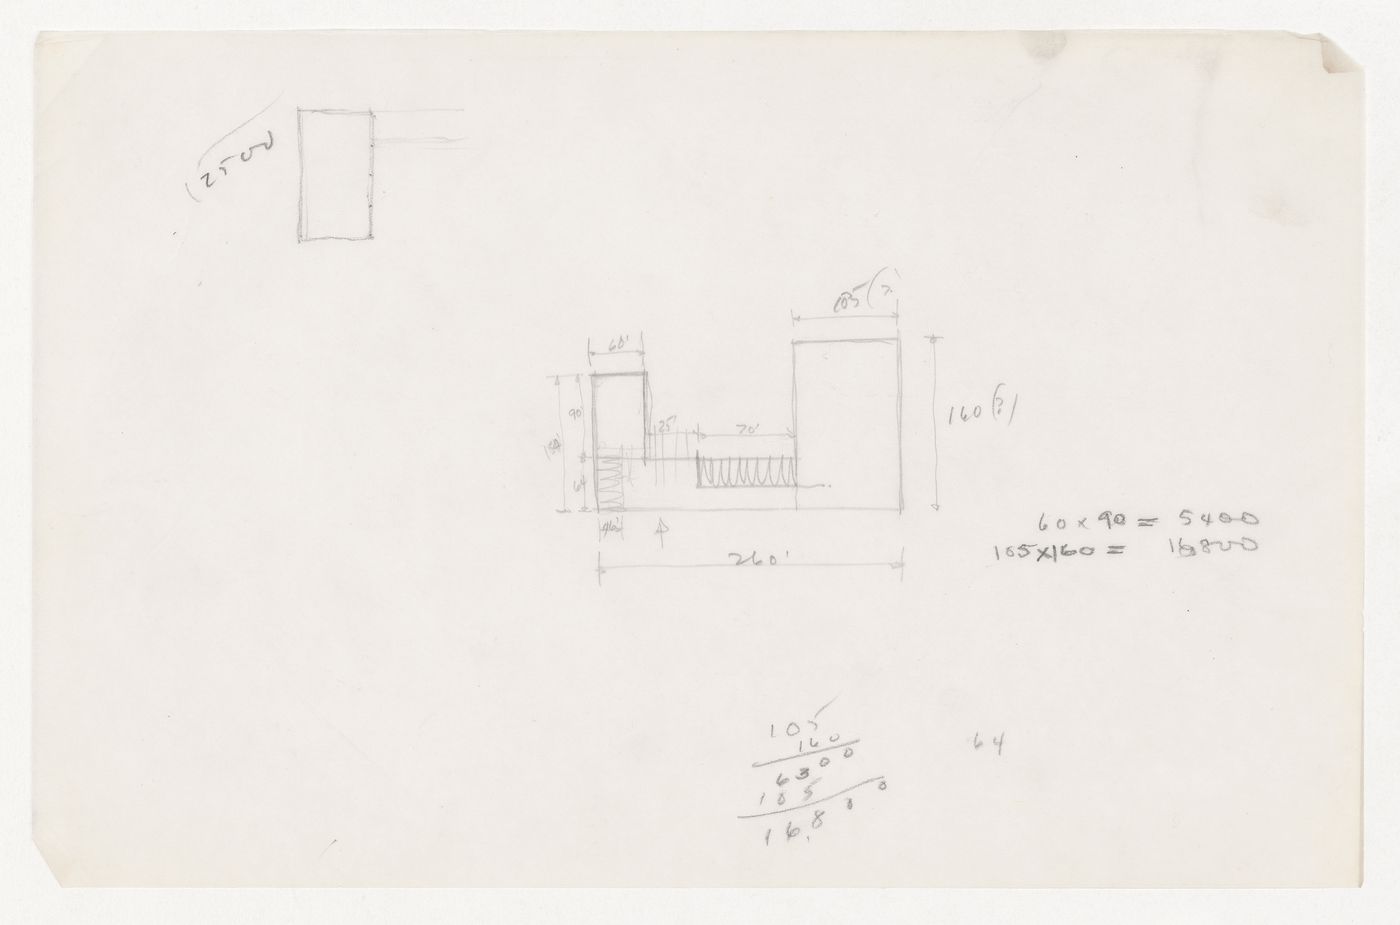 Sketch plan probably for the Gymnasium and Natatorium with sketch plan, possibly for the Field House